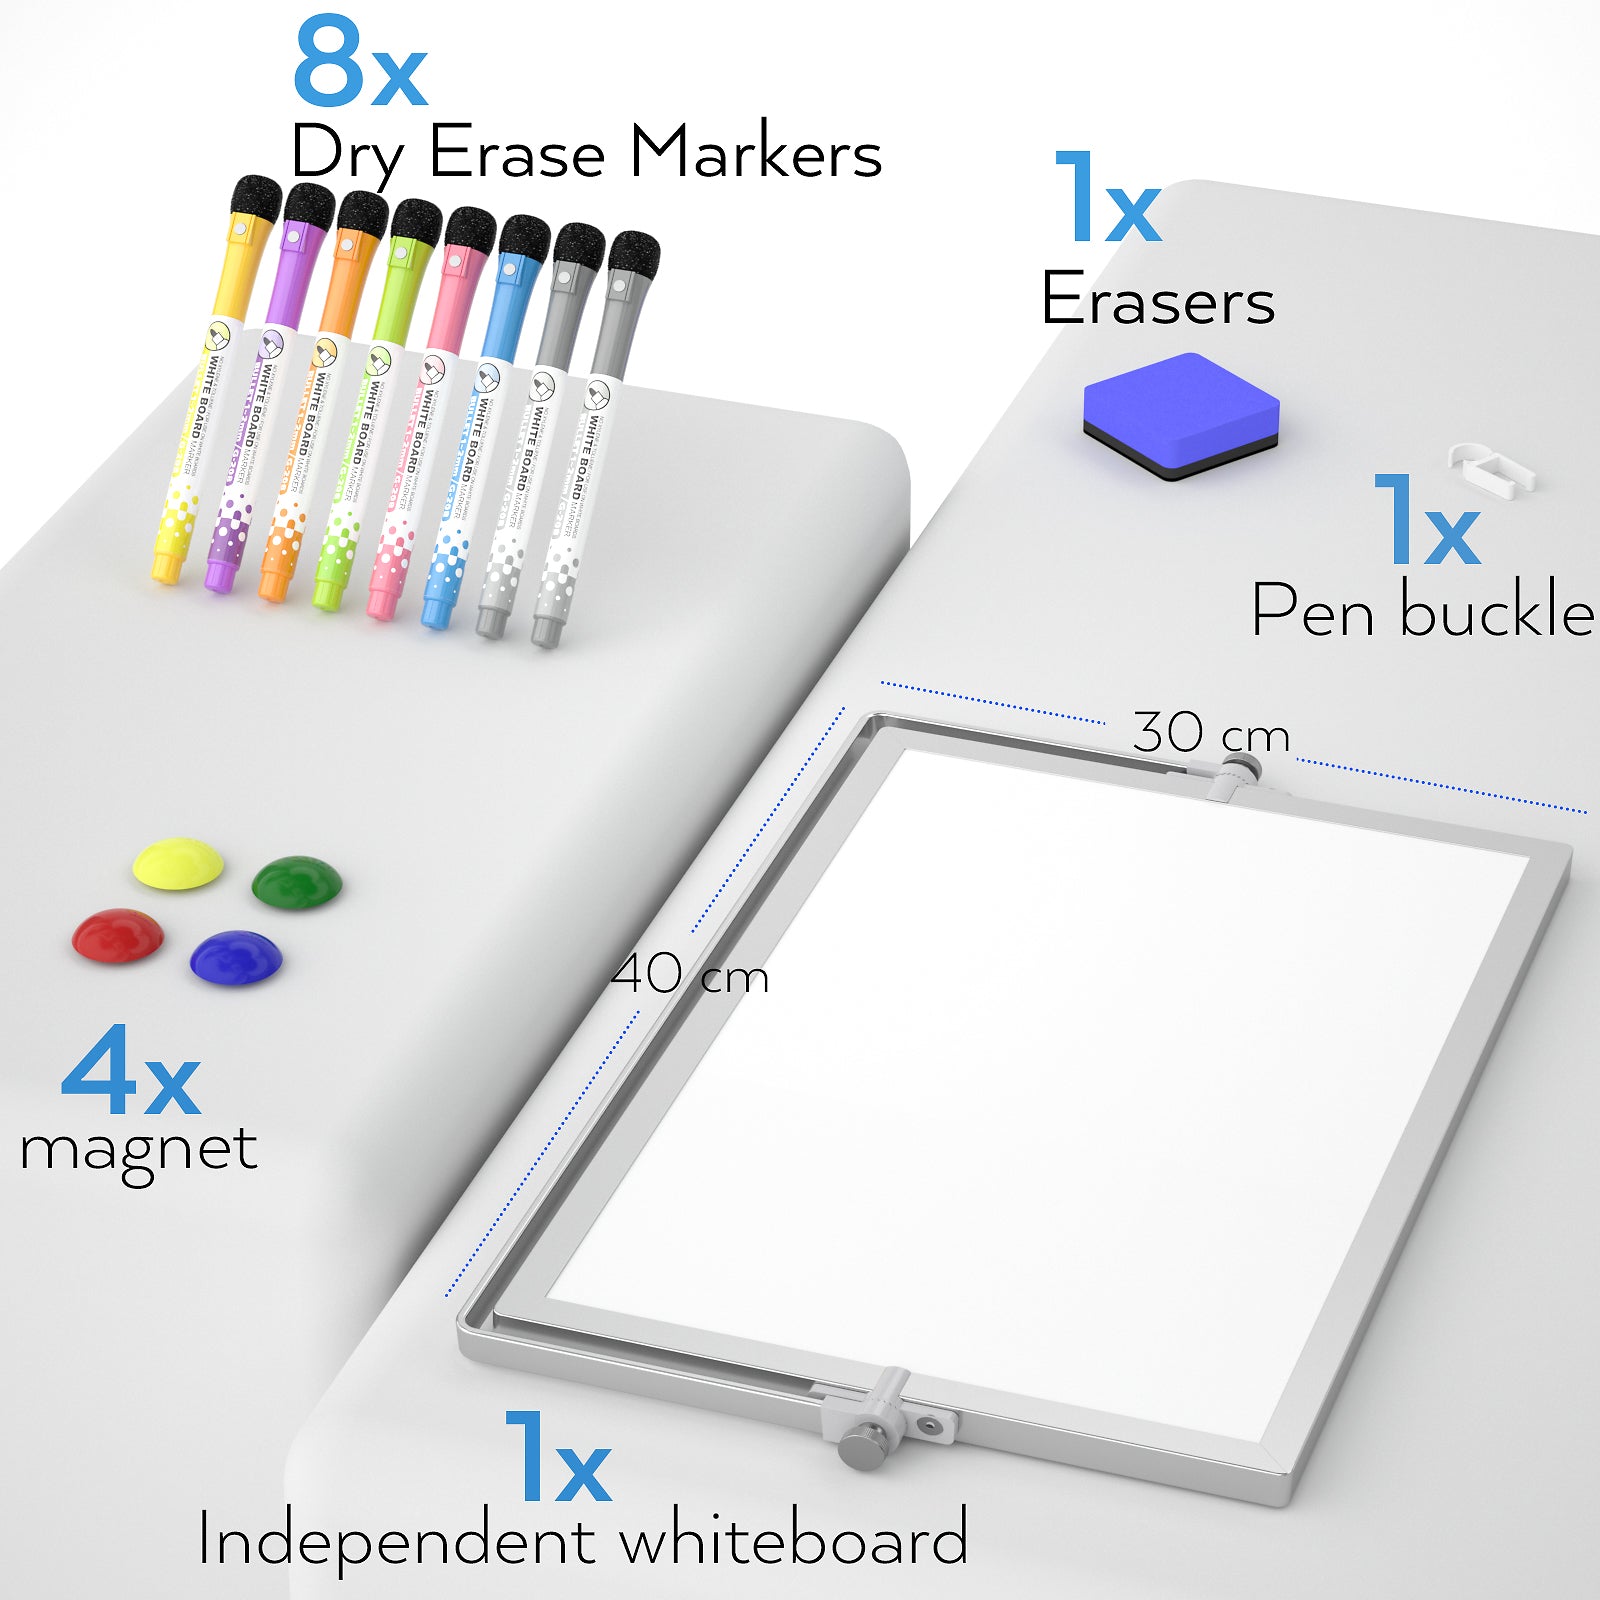 Mini Magnetic Drawing Board for Kids, Includes Magnet Board with